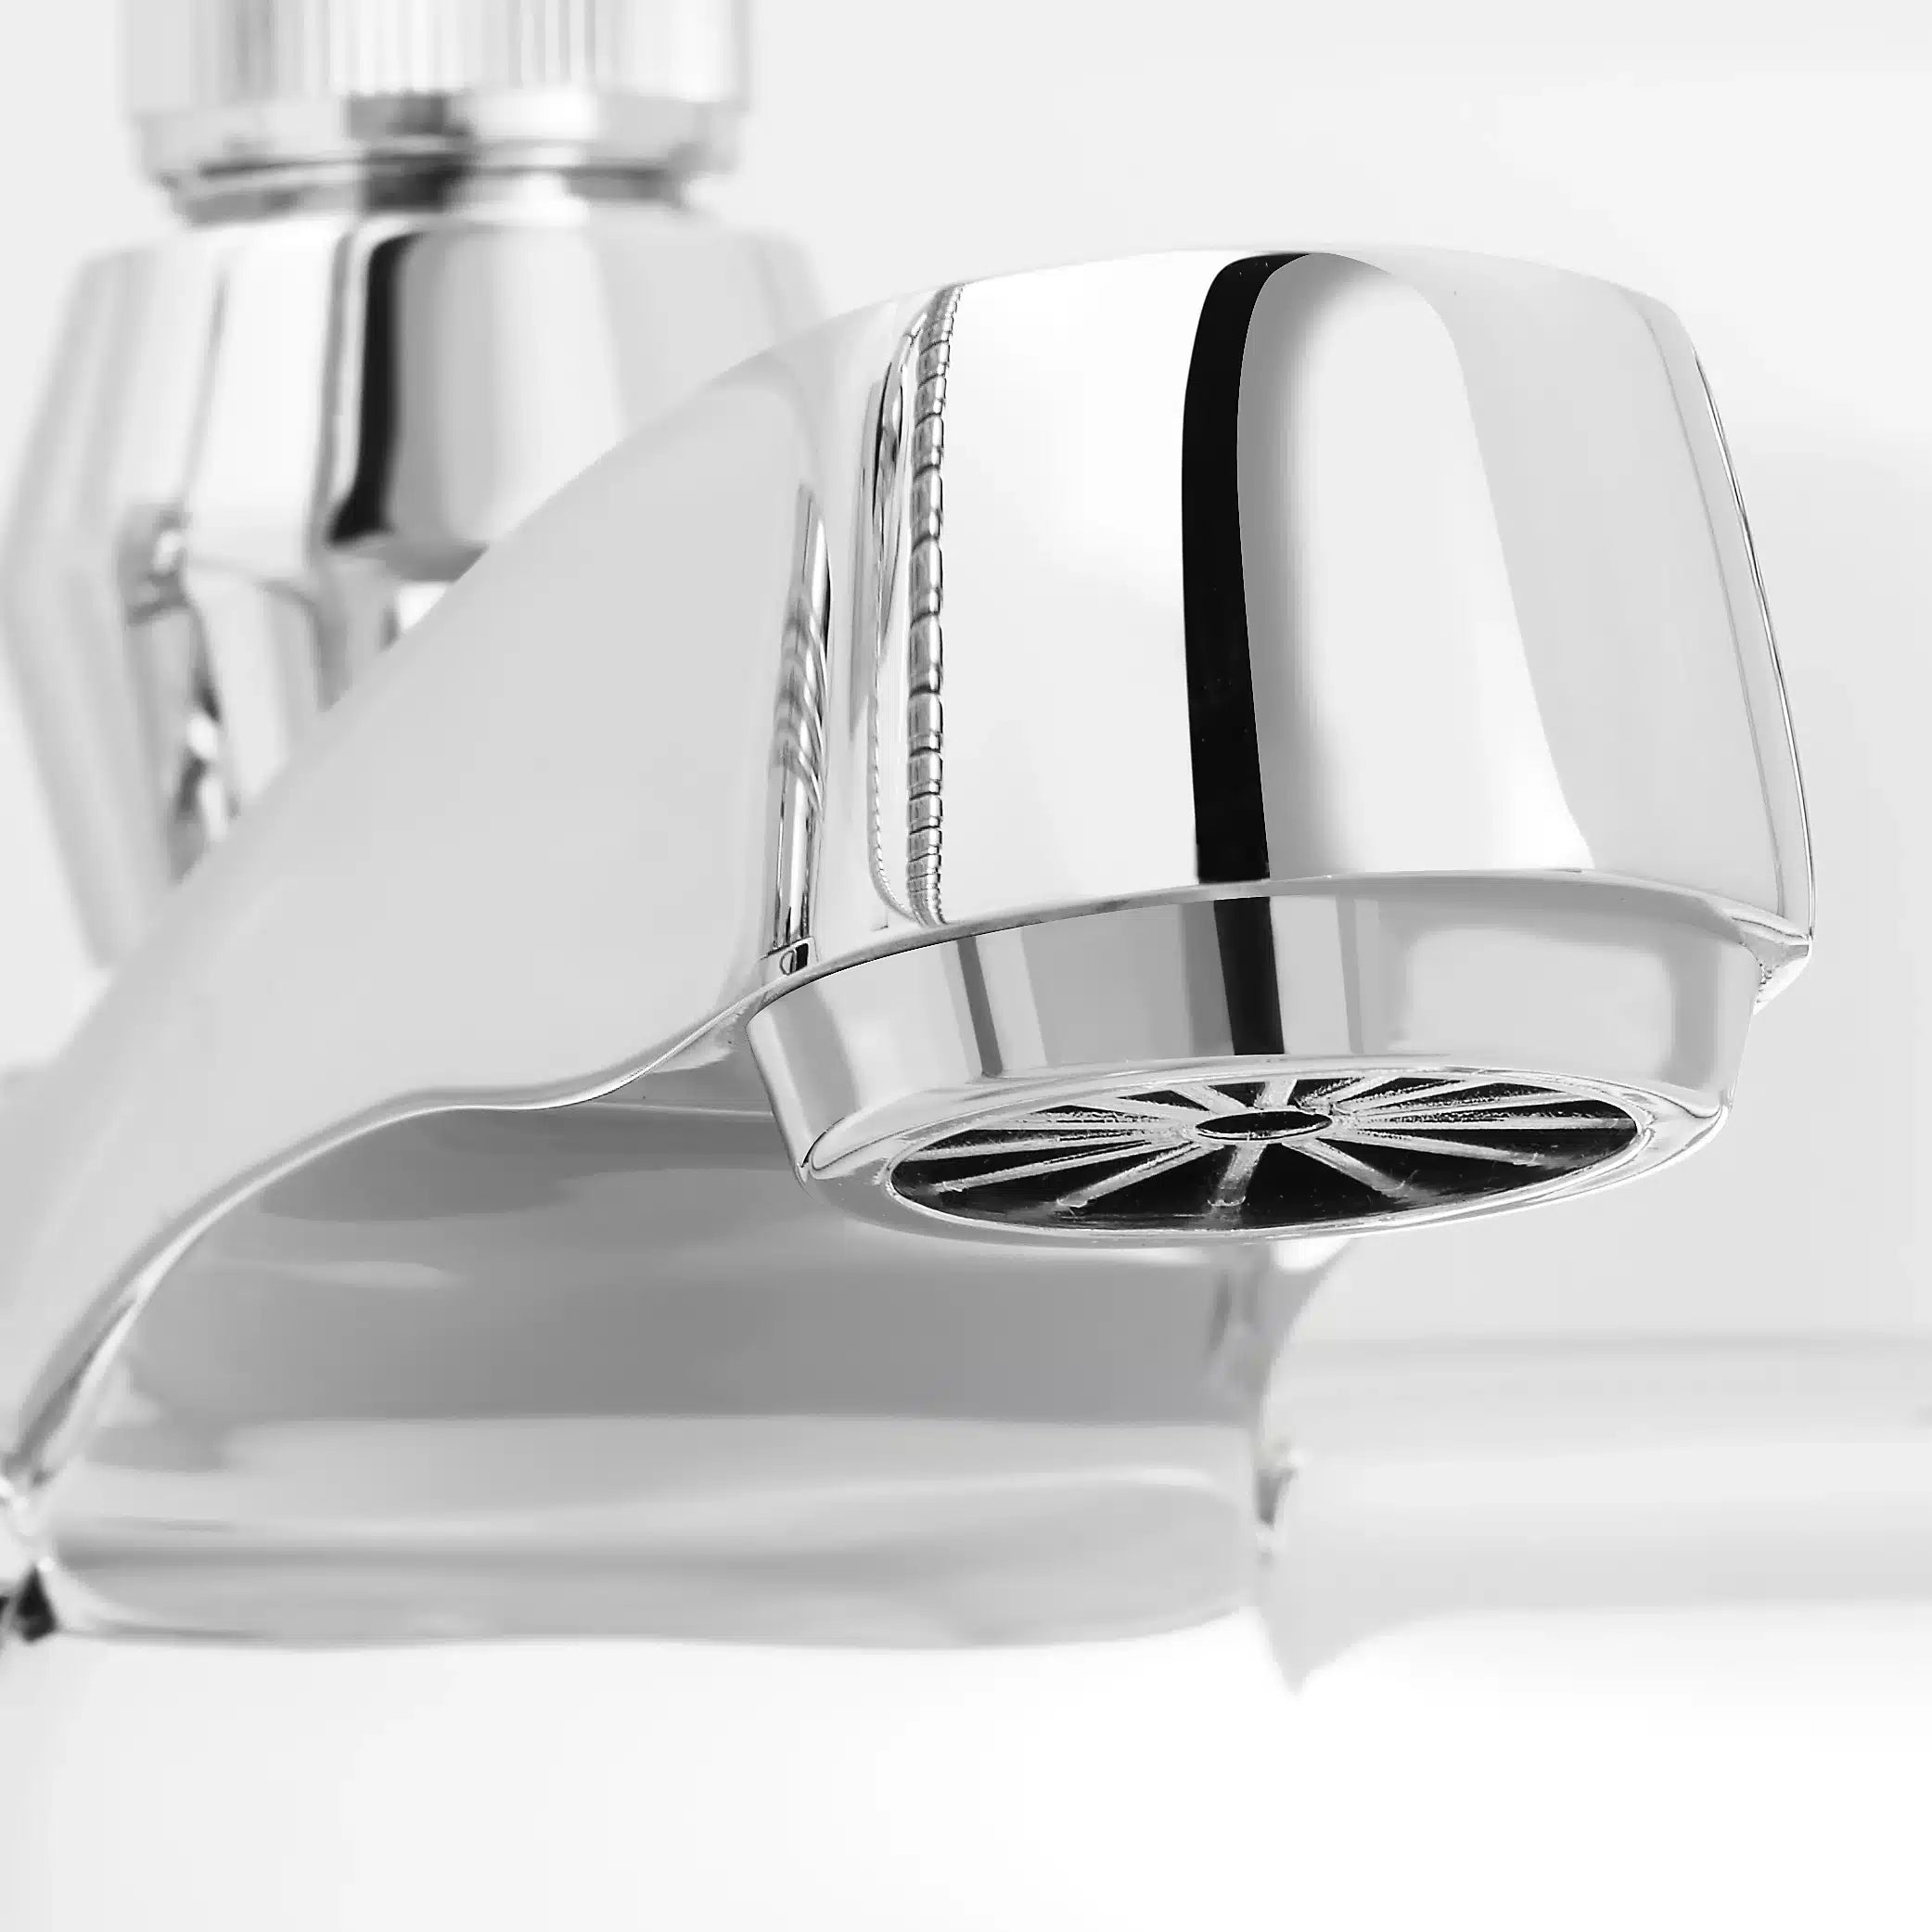 GoodHome Annagh Combi boiler, gravity-fed & mains pressure water systems Bath Shower mixer Tap ¼ turn 3774